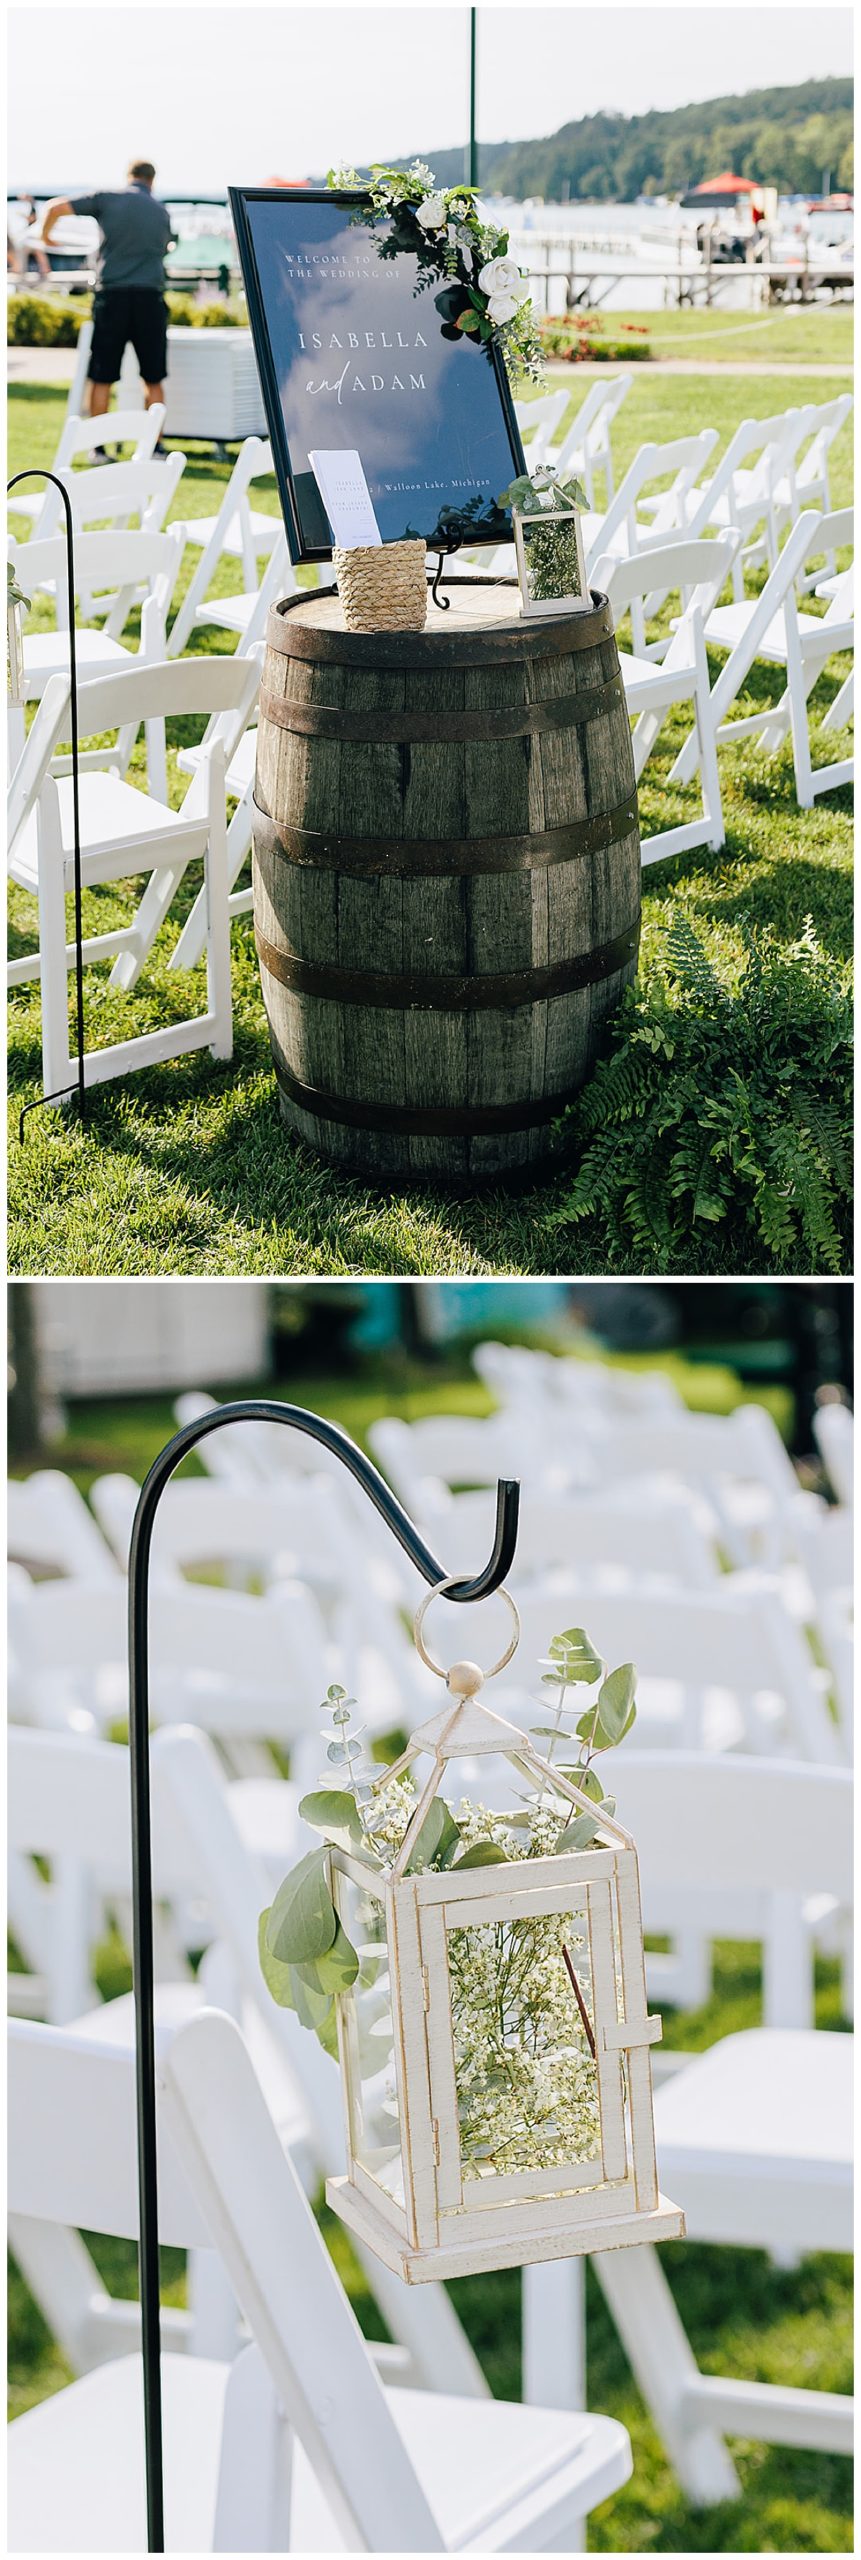 ceremony details at The Talcott On Walloon Lake